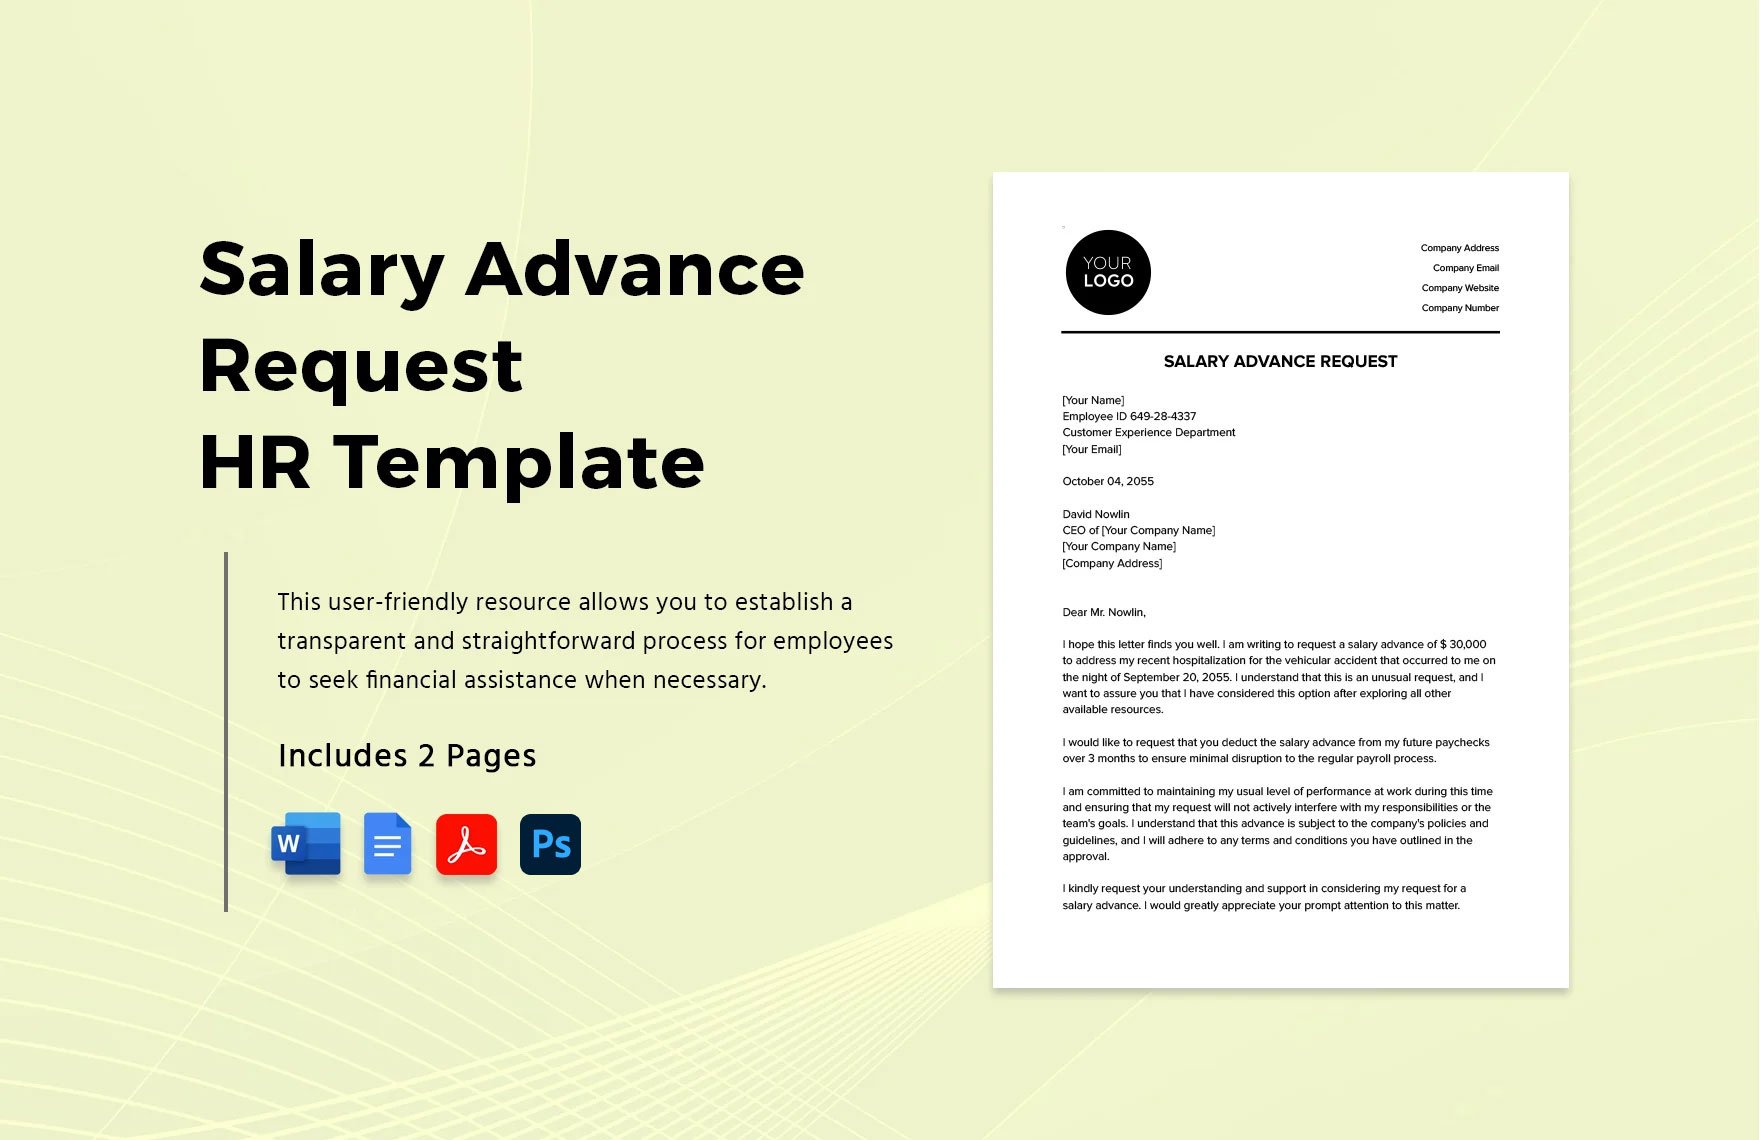 Salary Advance Request HR Template